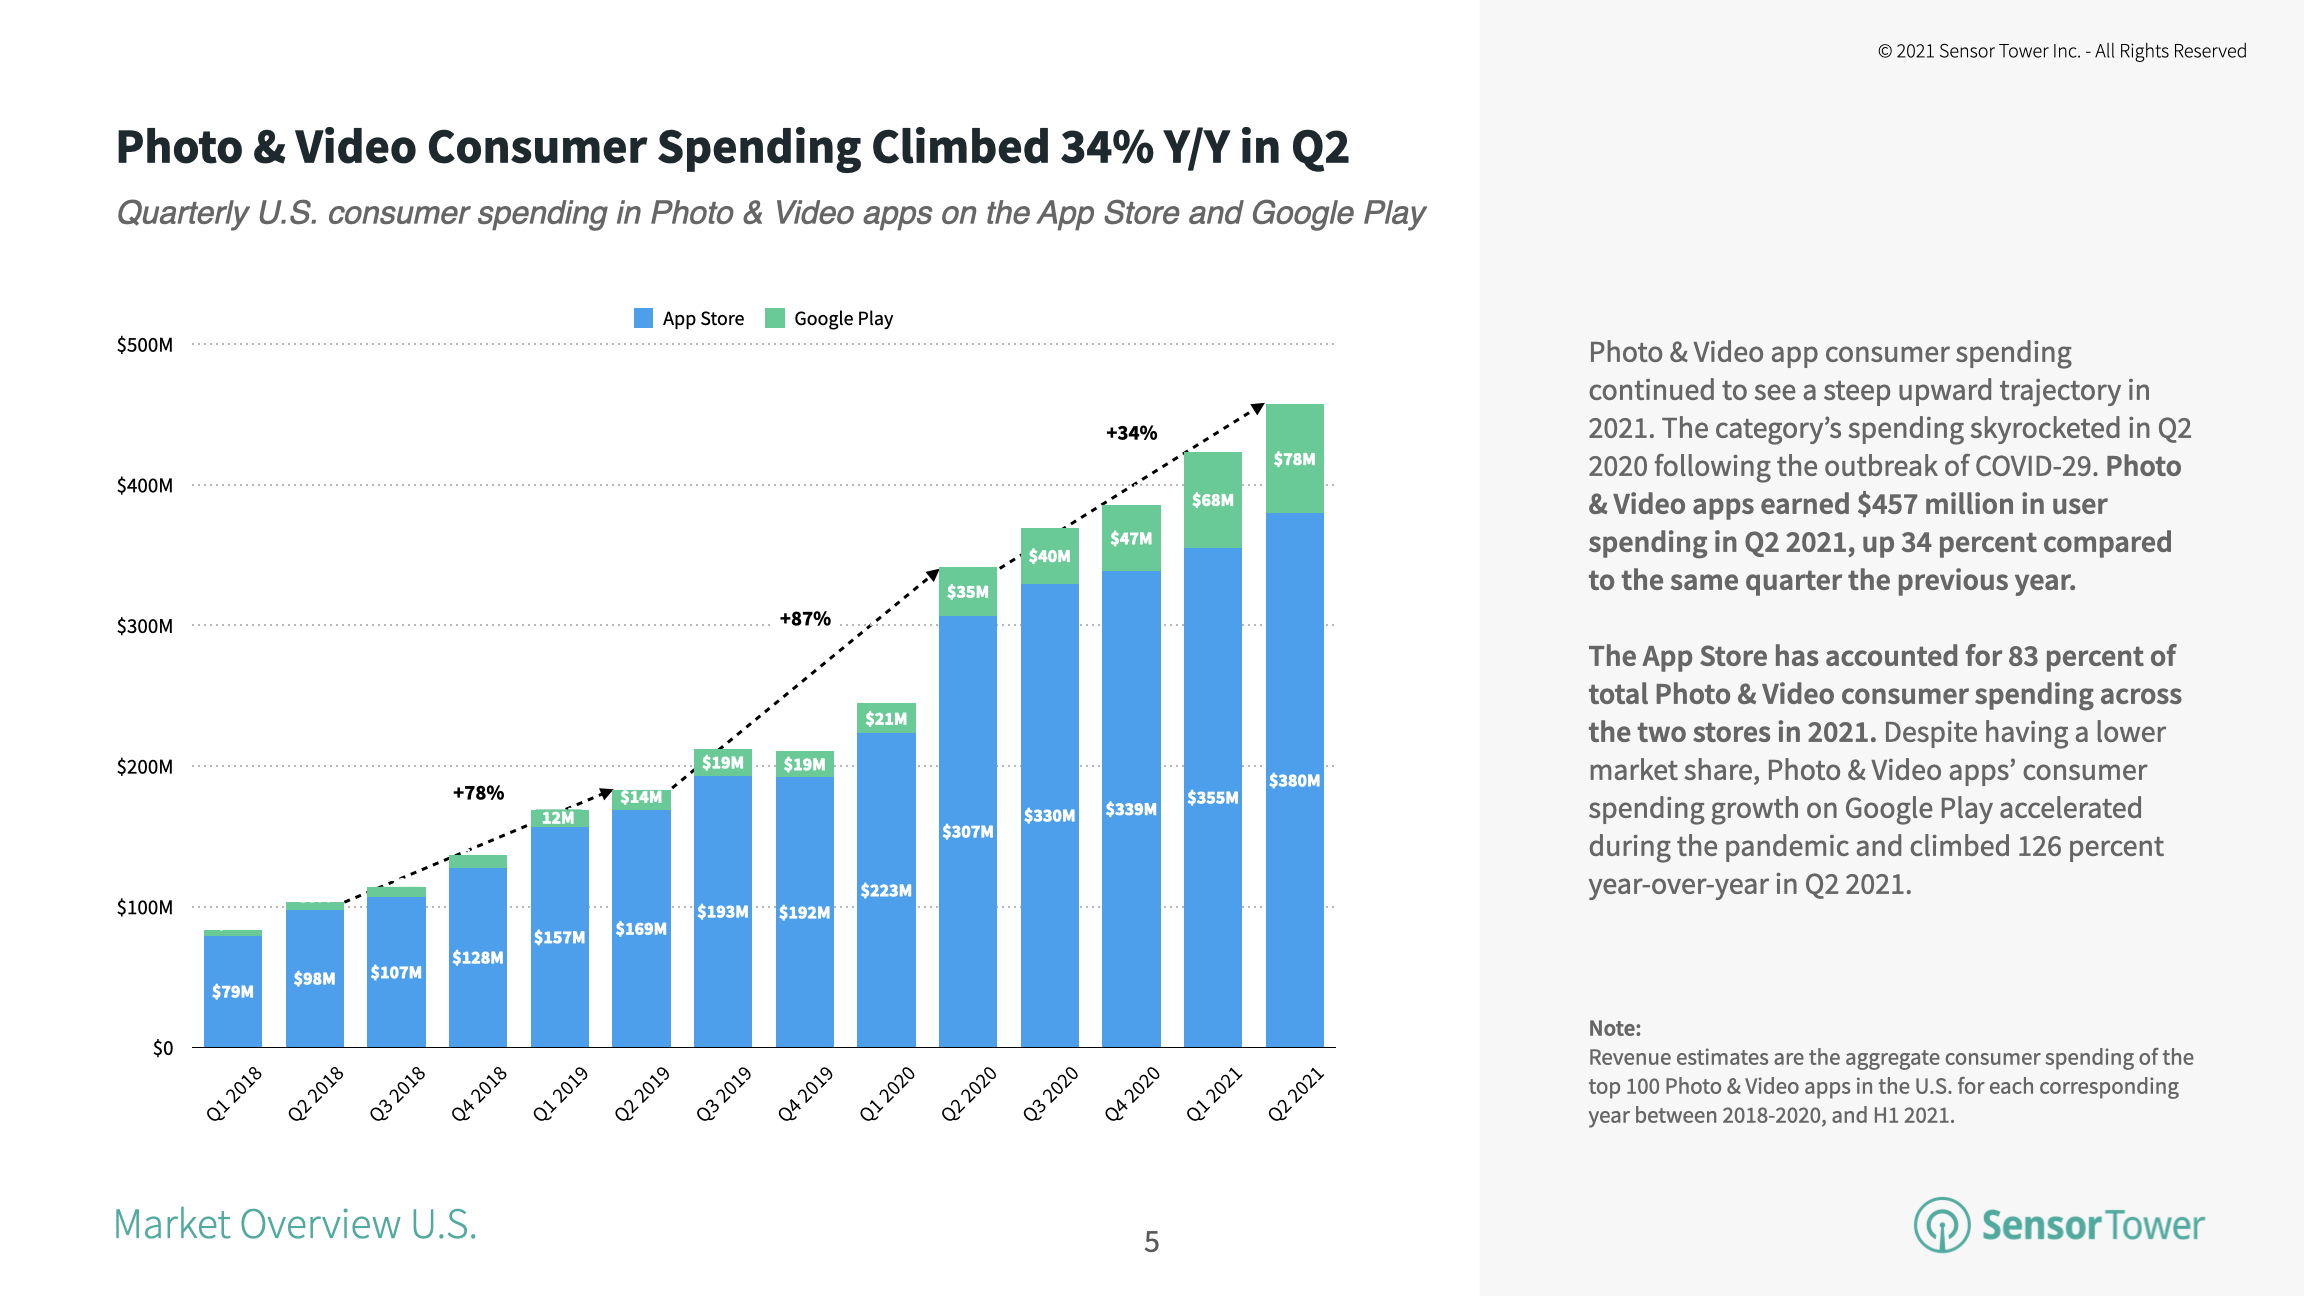 Consumer spending in the top 100 Photo & Video apps grew 34 percent year-over-year in Q2 2021